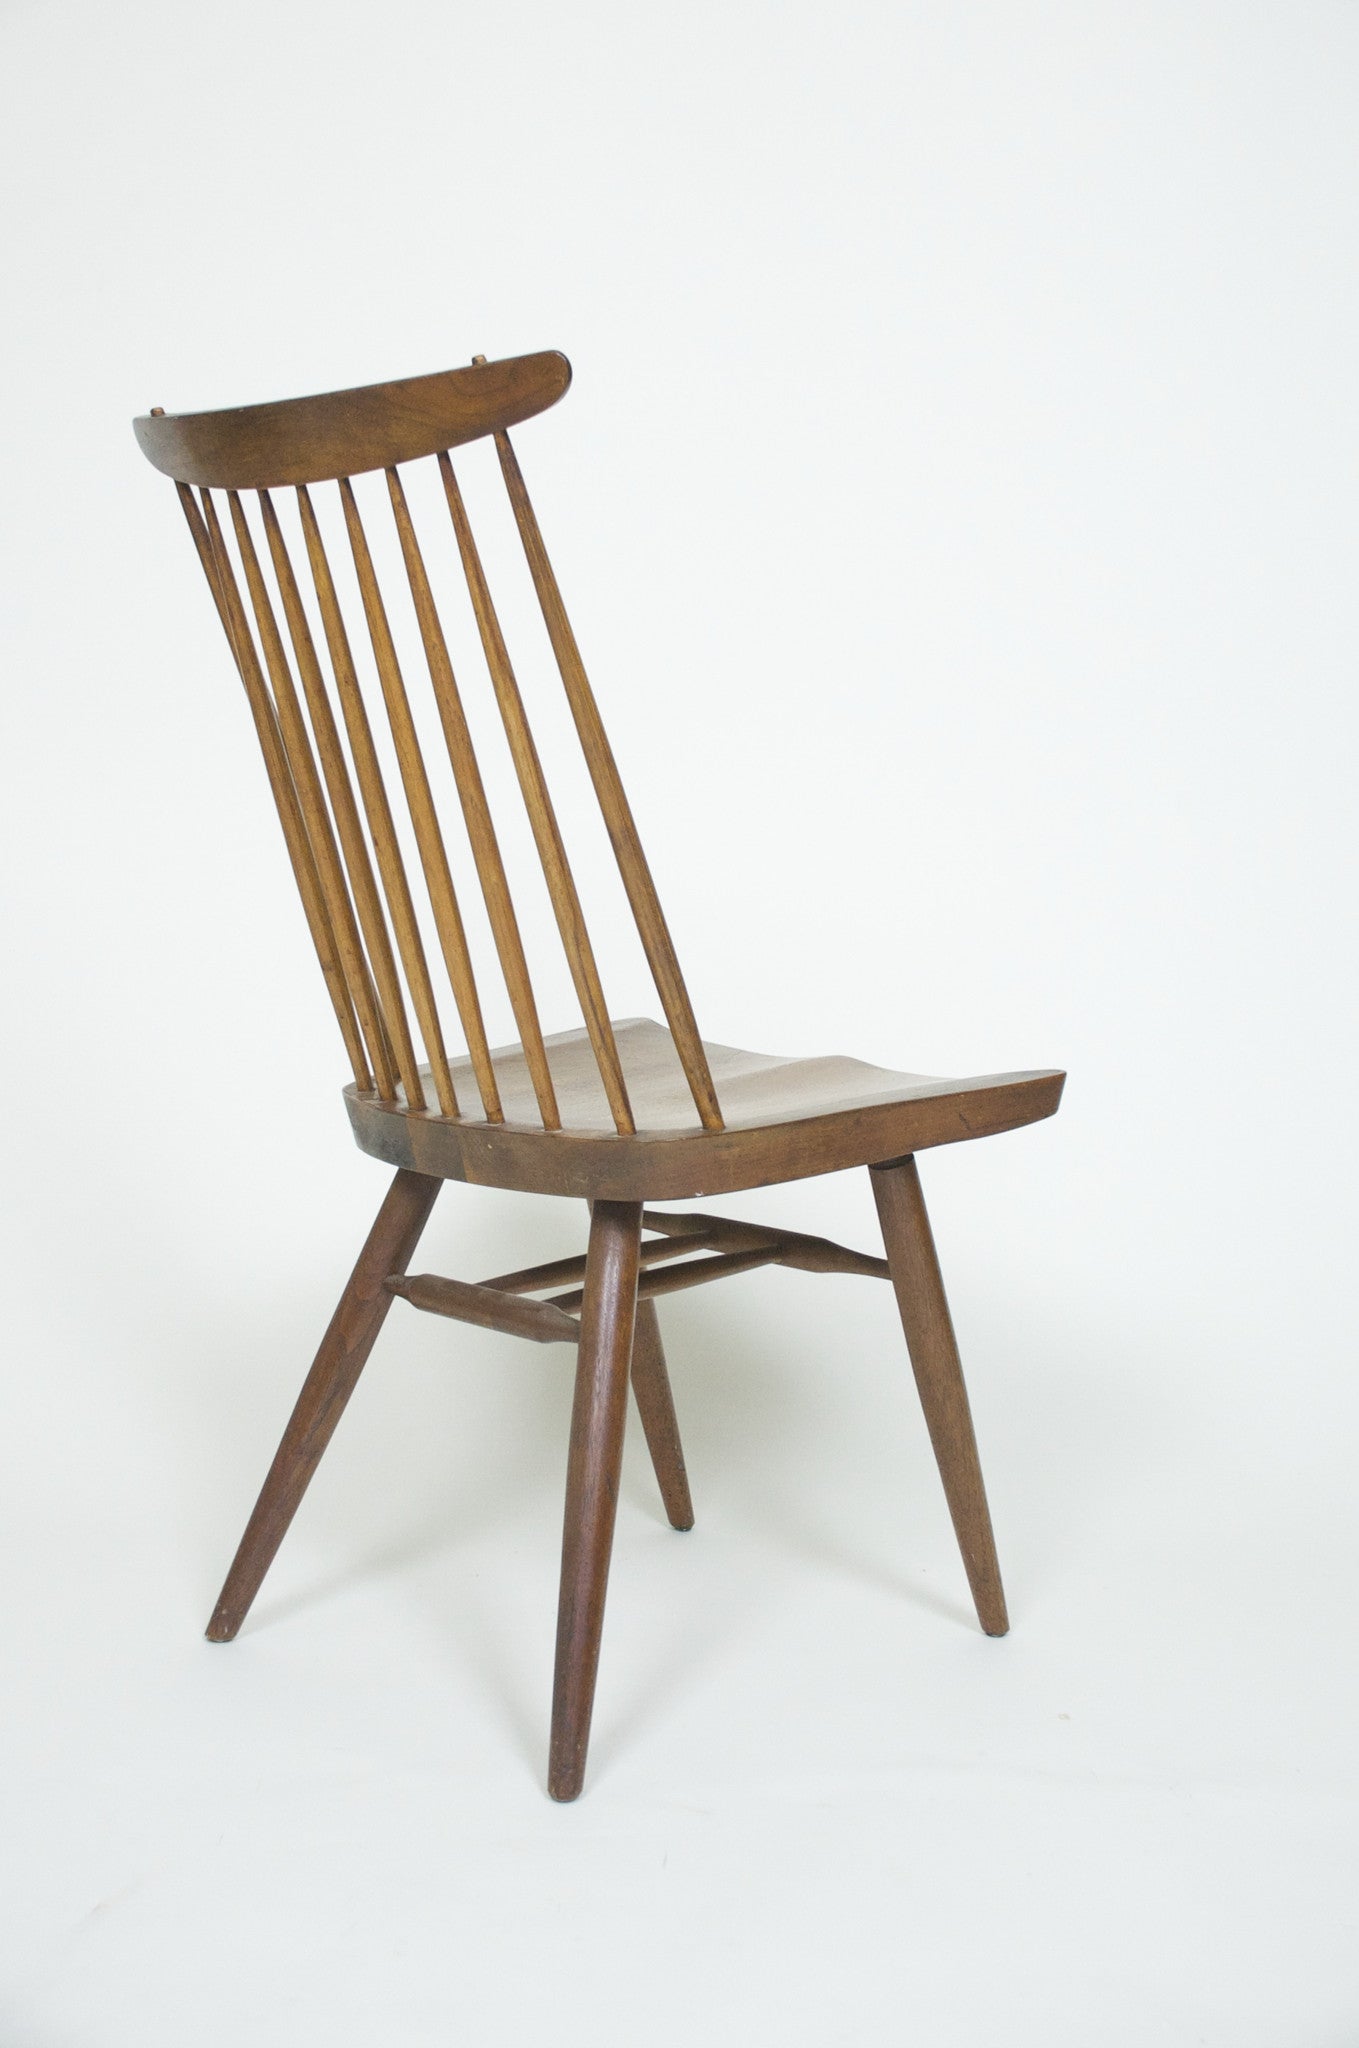 SOLD George Nakashima for Widdicomb Pair Of New Chairs